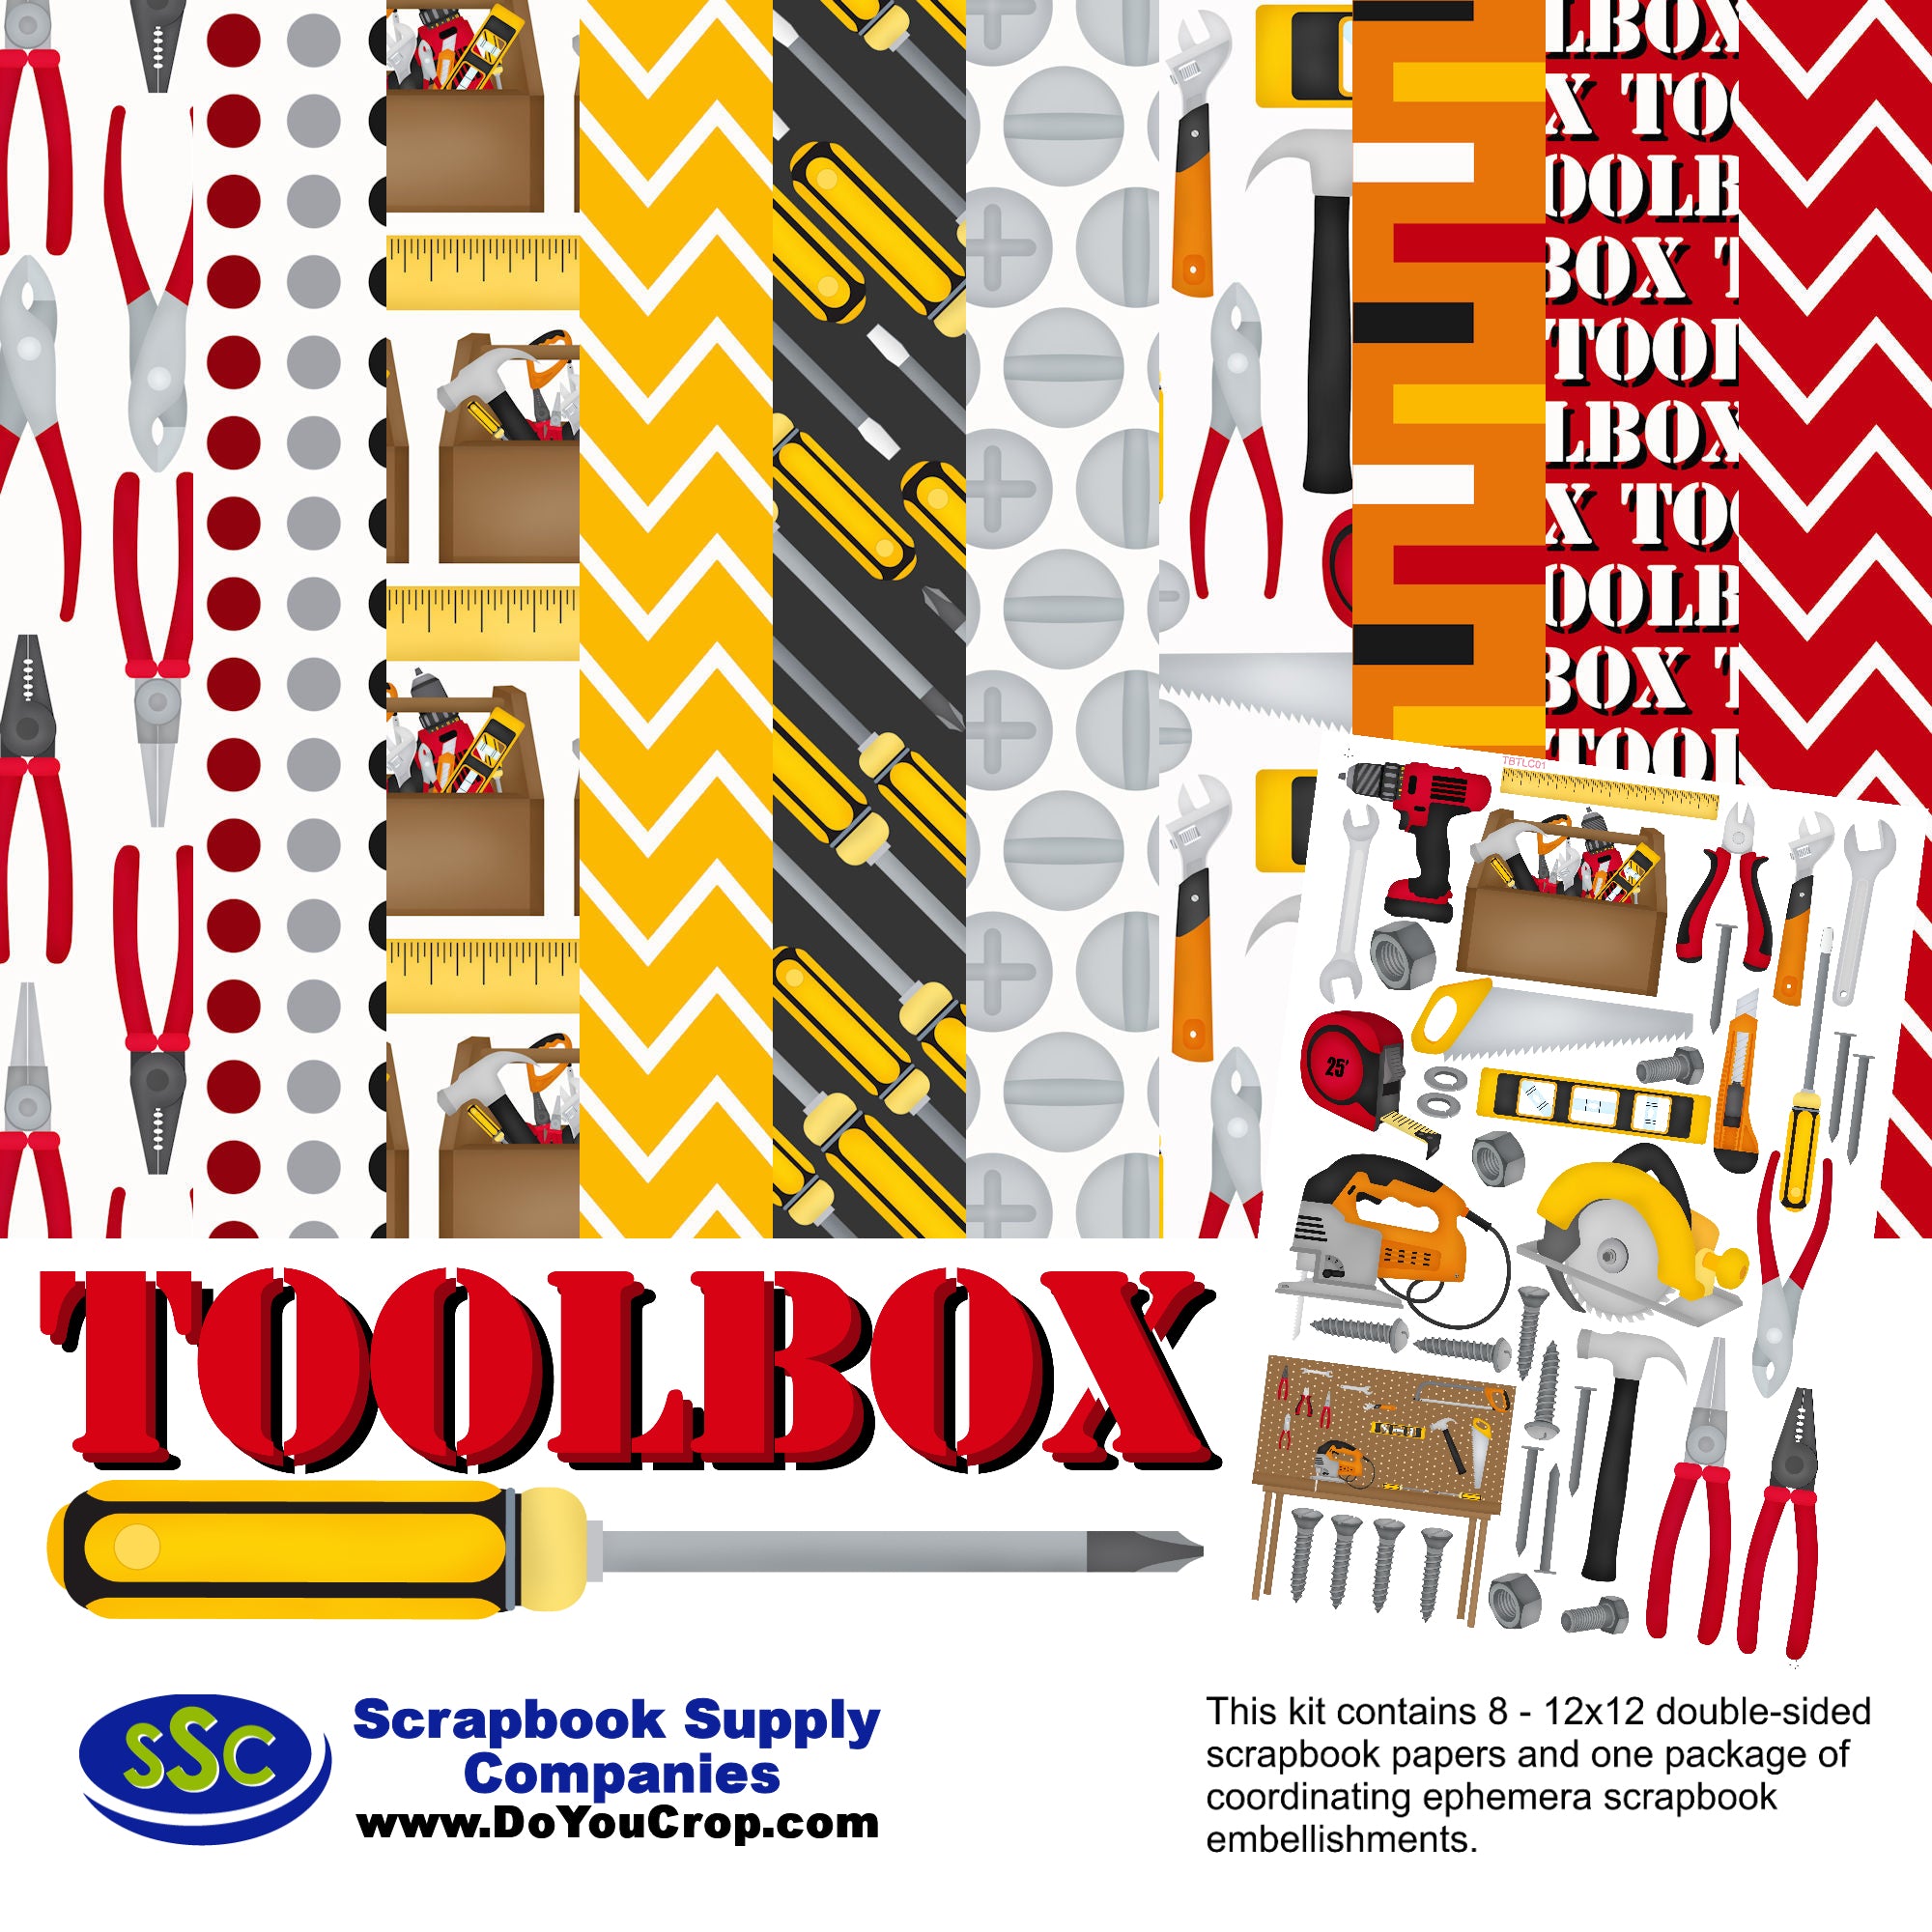 Toolbox Time 12 x 12 Scrapbook Paper & Embellishment Kit by SSC Designs